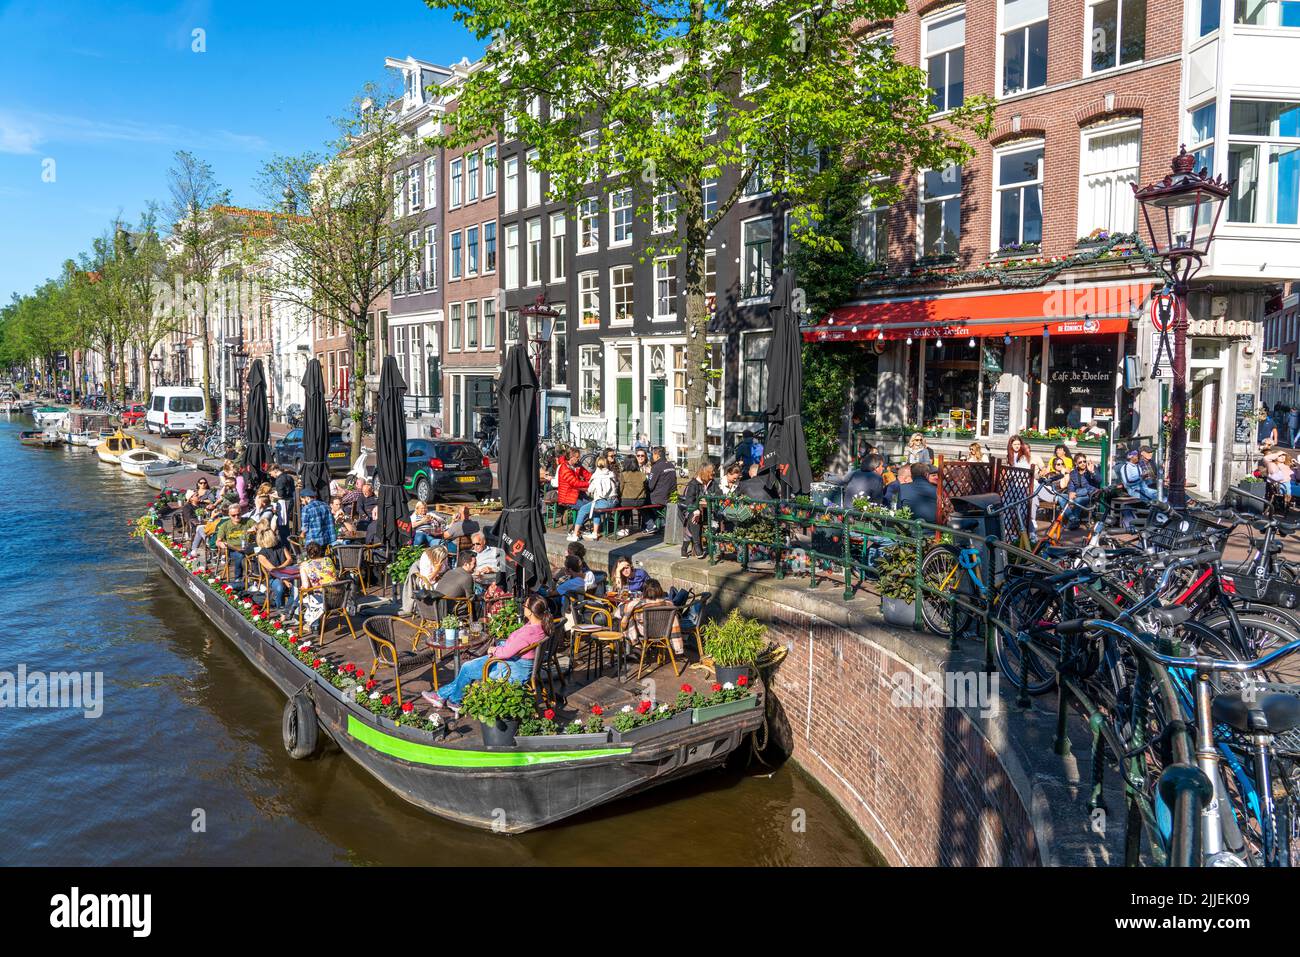 Houses on the Kloveniersburgwal canal, Old Town of Amsterdam, Canal Belt, Aluminiumbrug, Café with terrace on a pontoon boat, Amsterdam, Netherlands Stock Photo